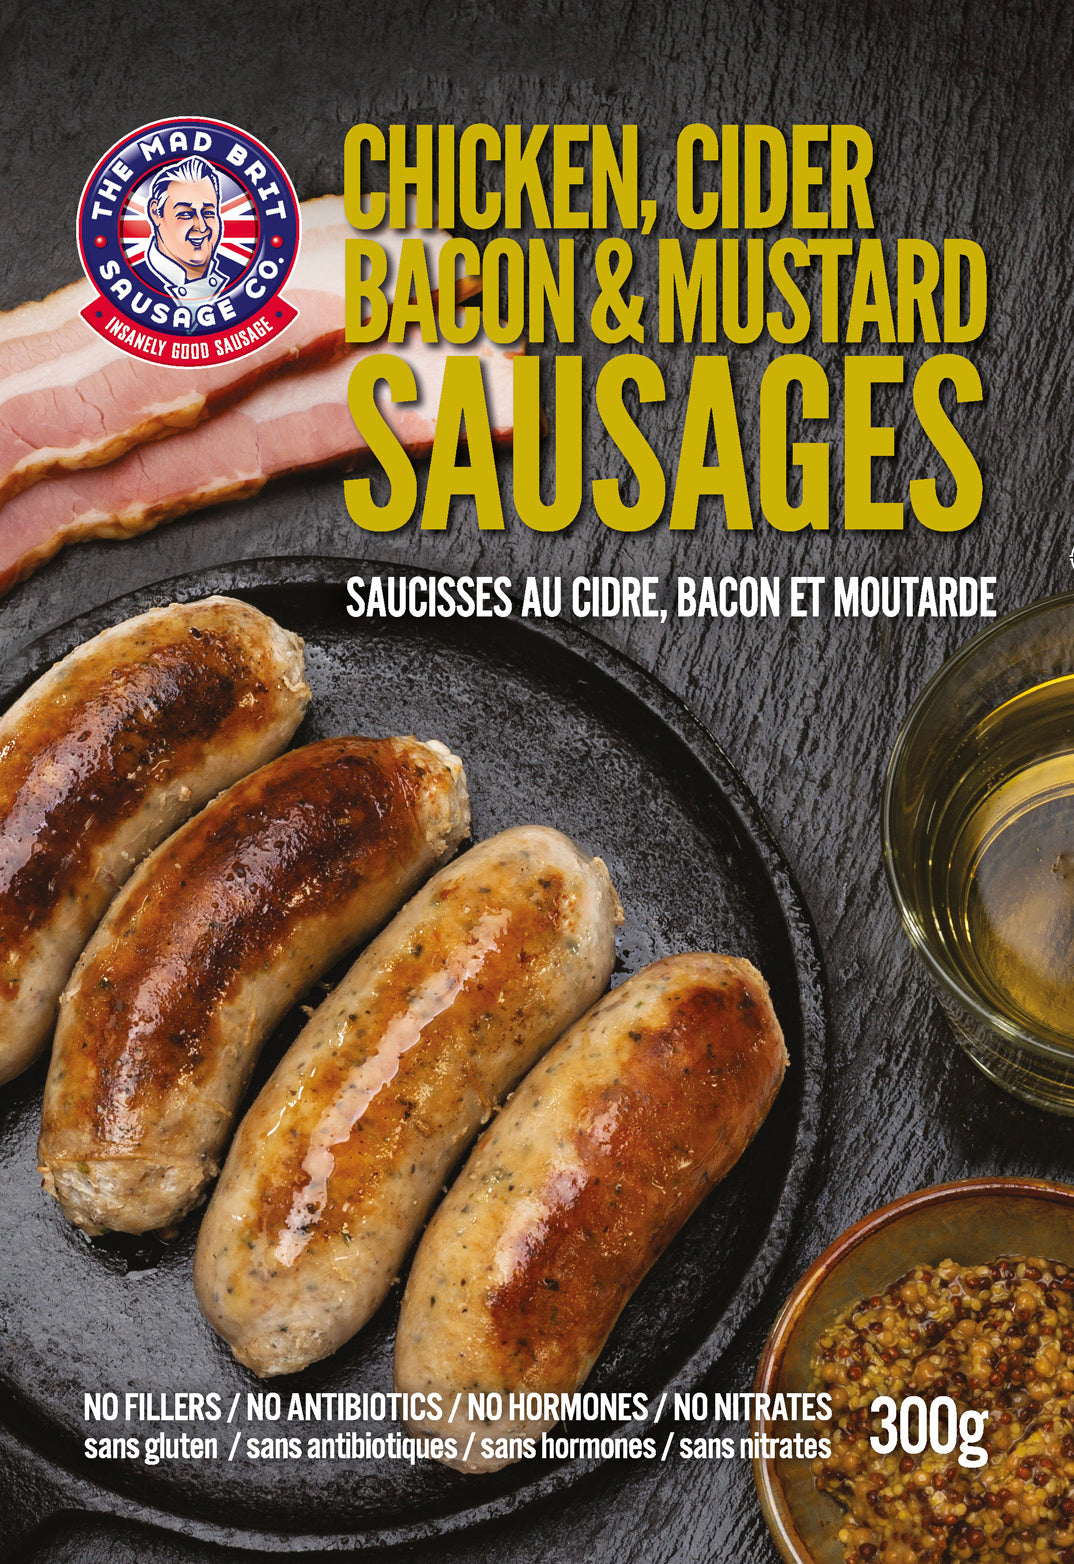 Mad Brit Sausage Co. - Chicken, Cider and Bacon Sausages